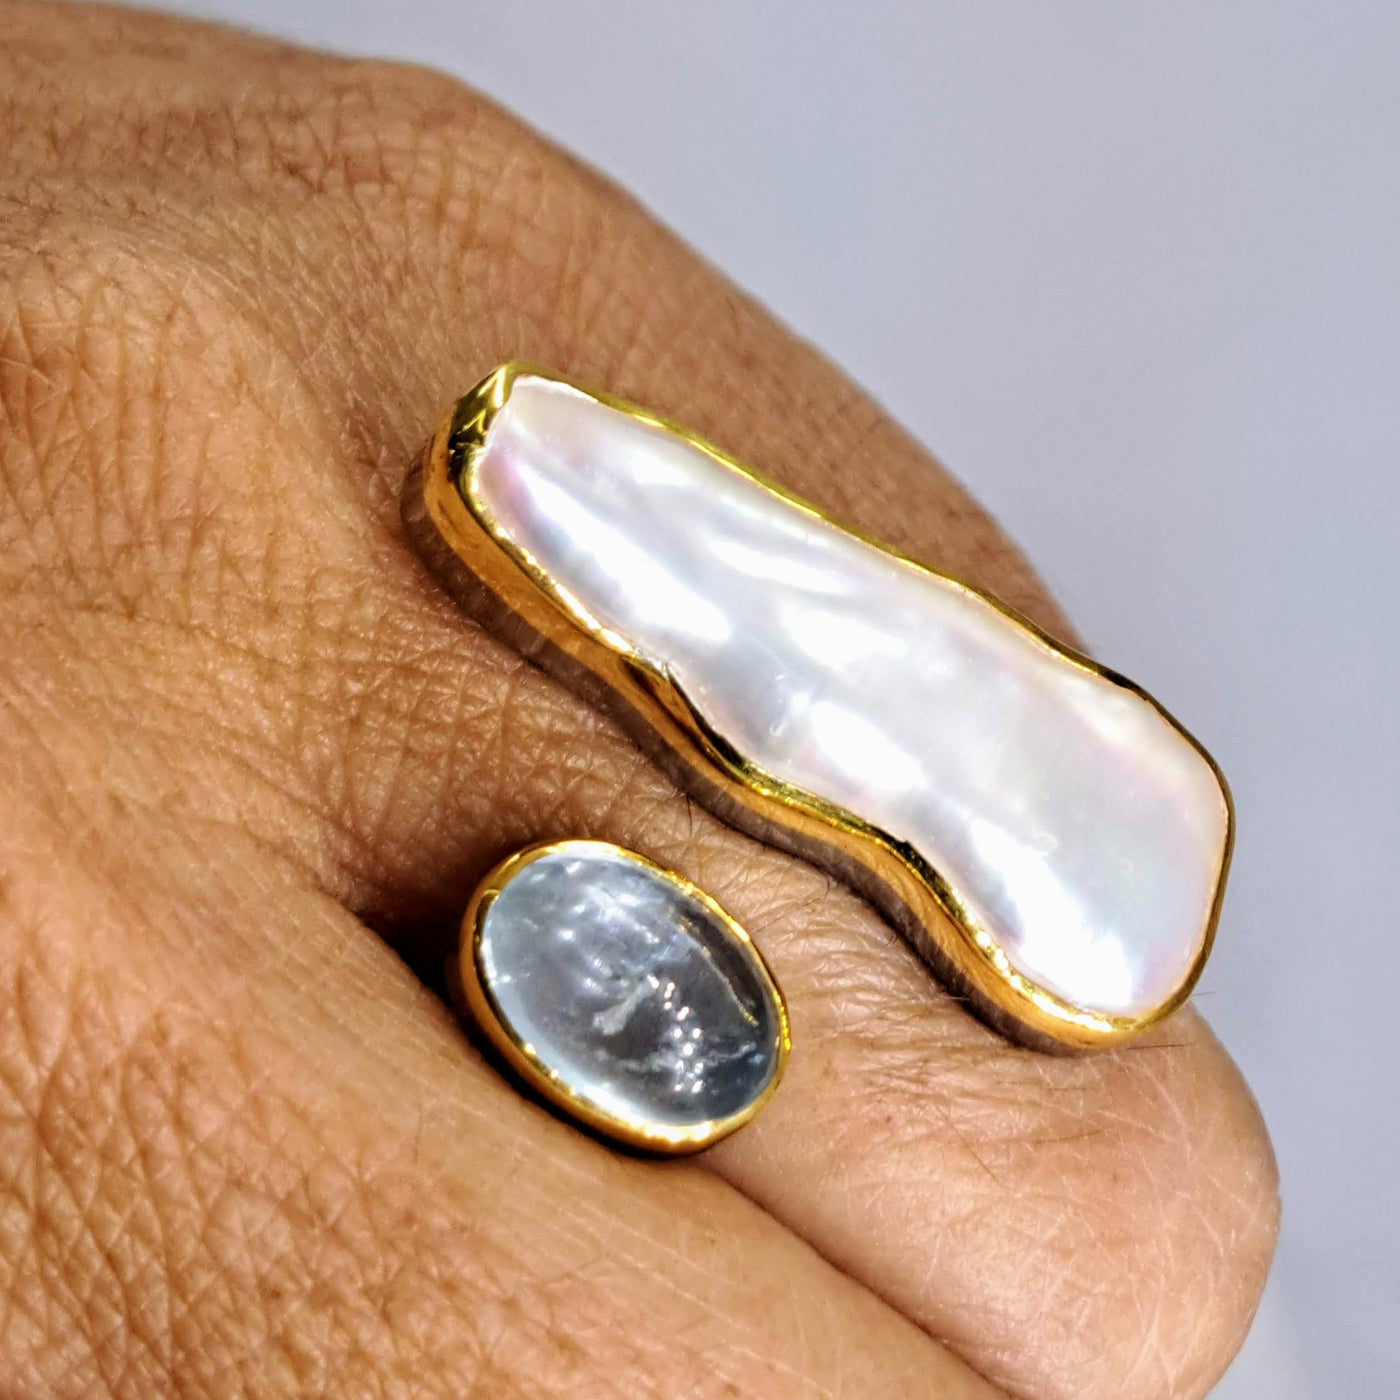 "In The Blue" Adjustable Ring - Aquamarine, Pearl, Black Silver, 18k Gold